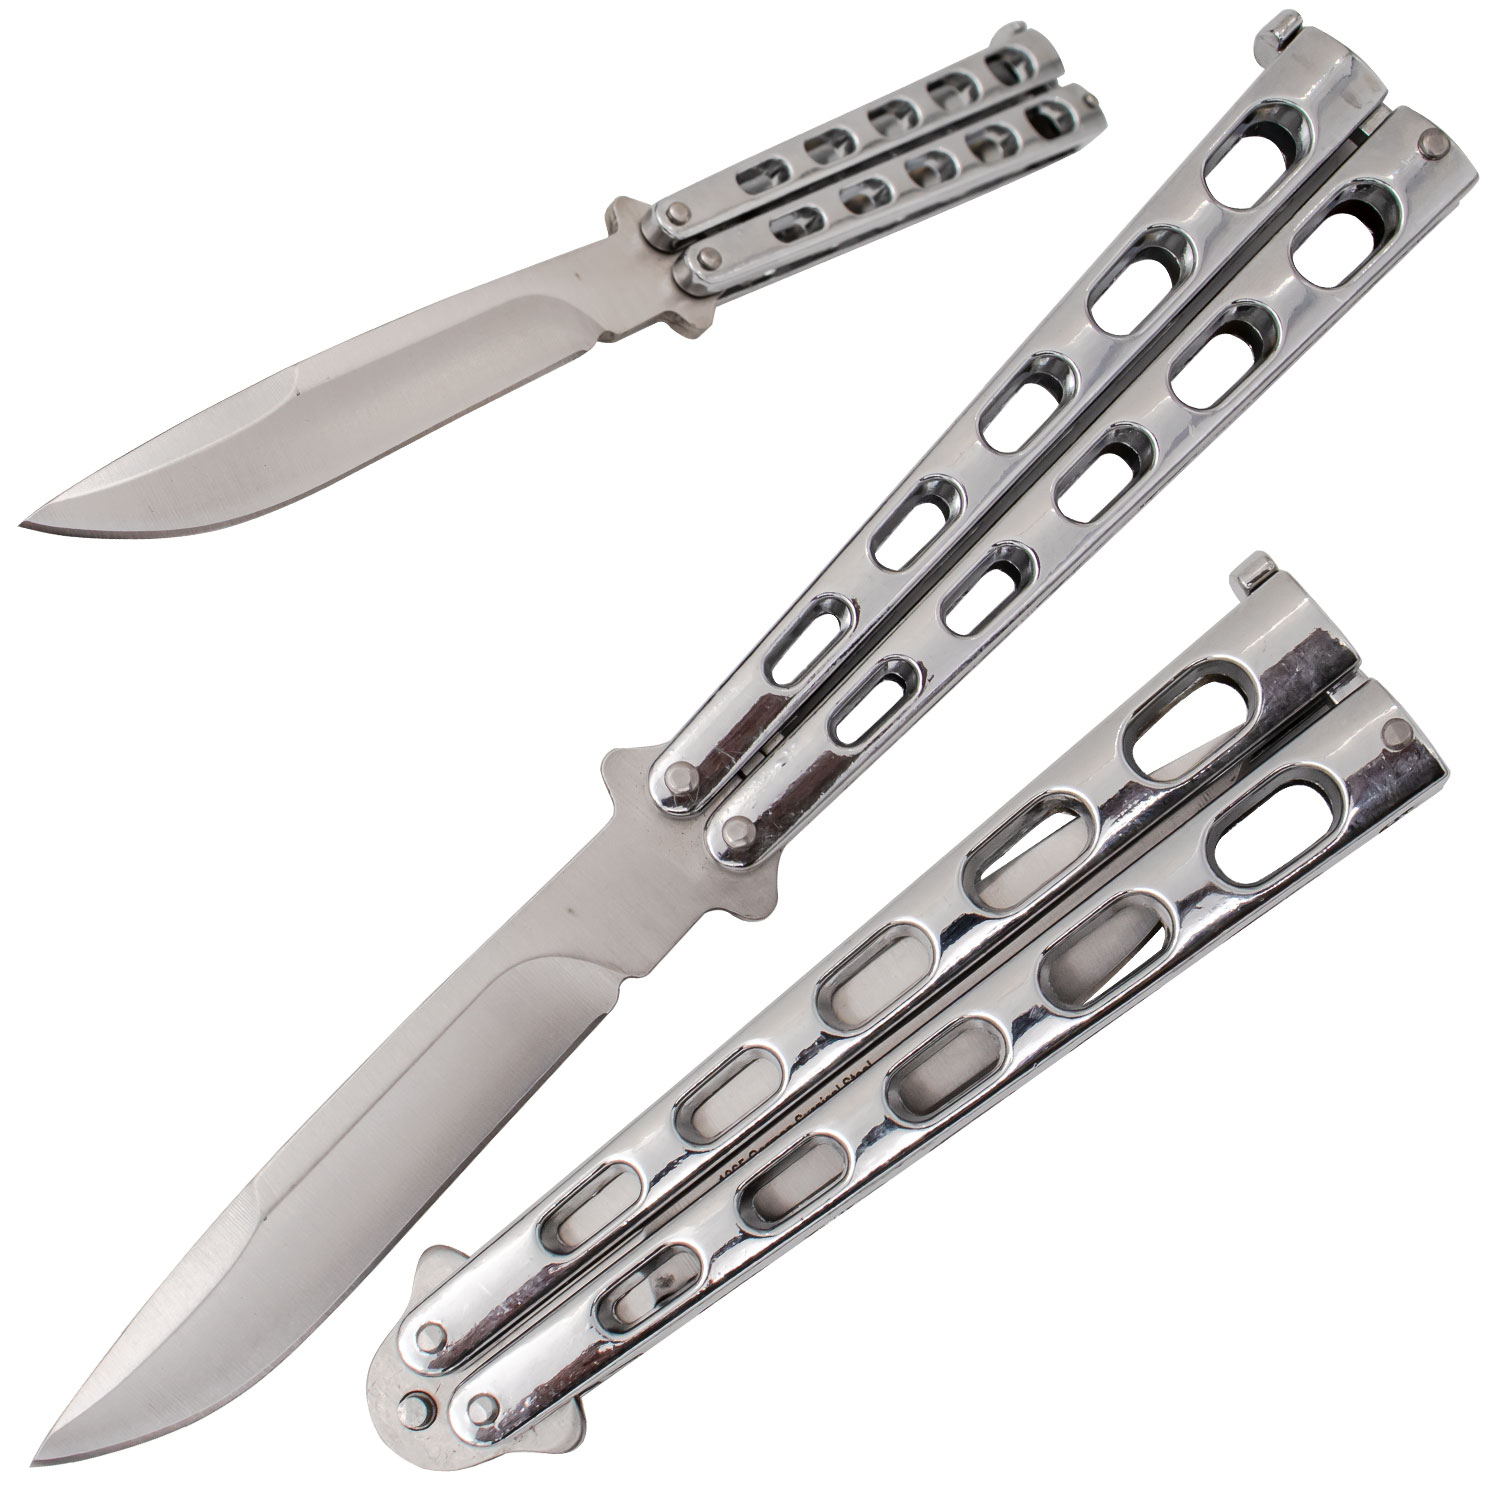 Industrial State of The Art Balisong Butterfly Knife Silver